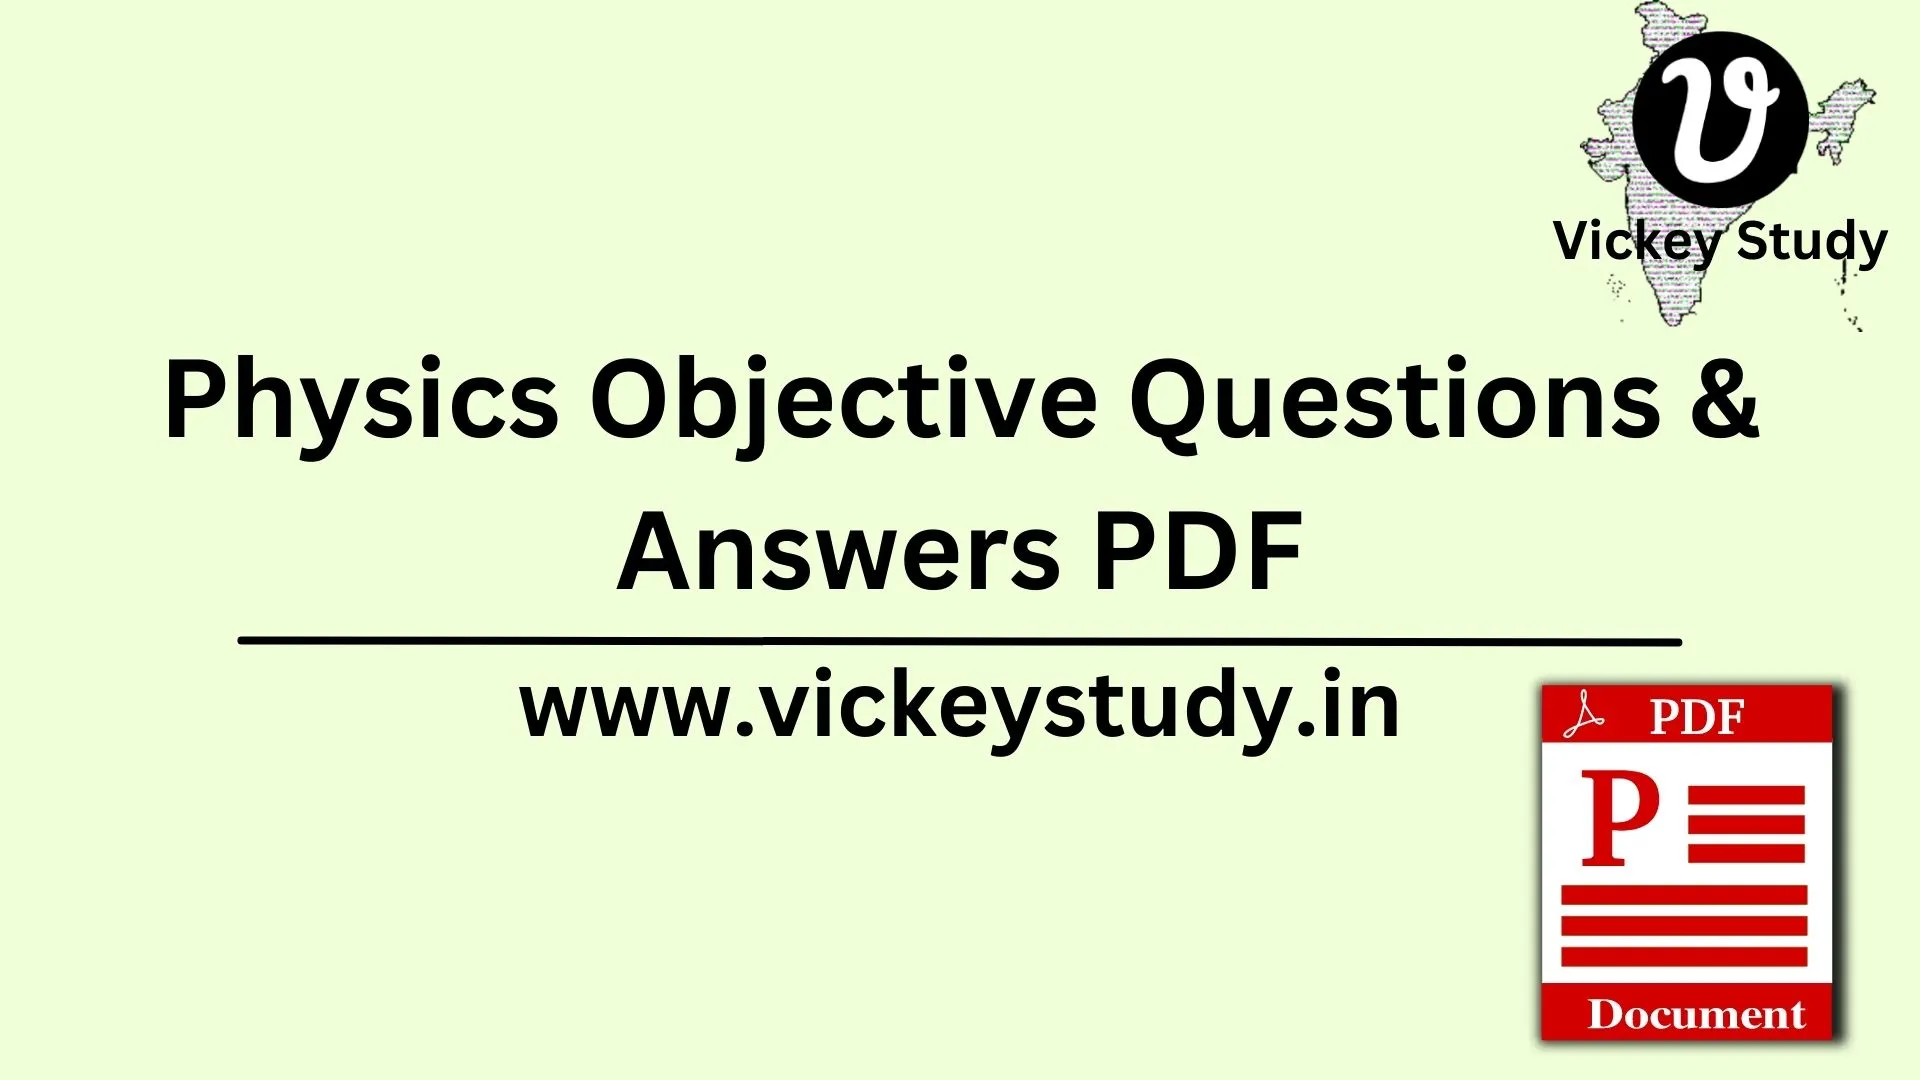 Physics Objective Questions & Answers PDF